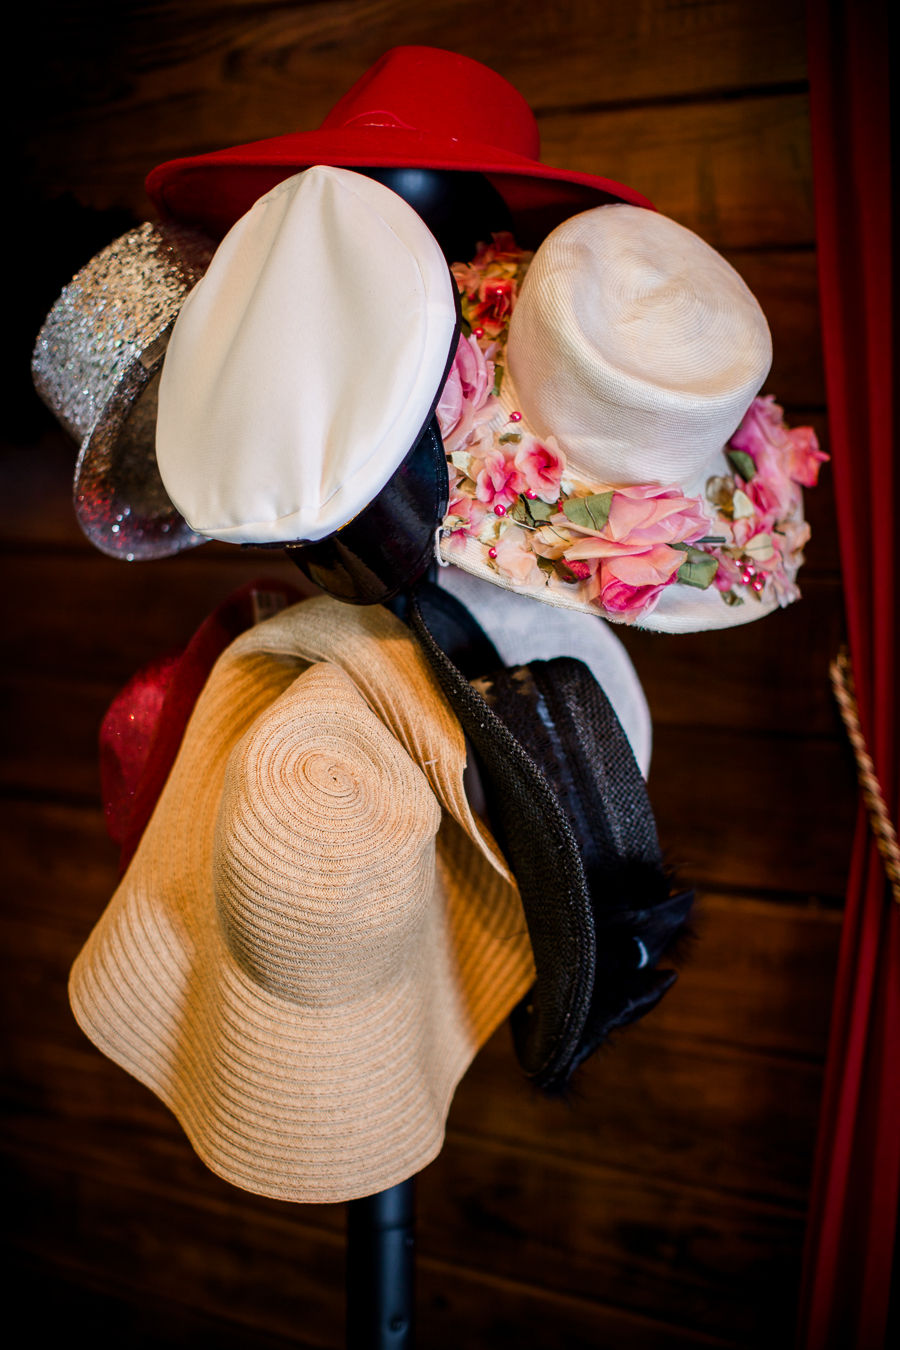 Selfie Studio hat choice at the open house of Knoxville Wedding Venue, Hunter Valley Farm, by Knoxville Wedding Photographer, Amanda May Photos.